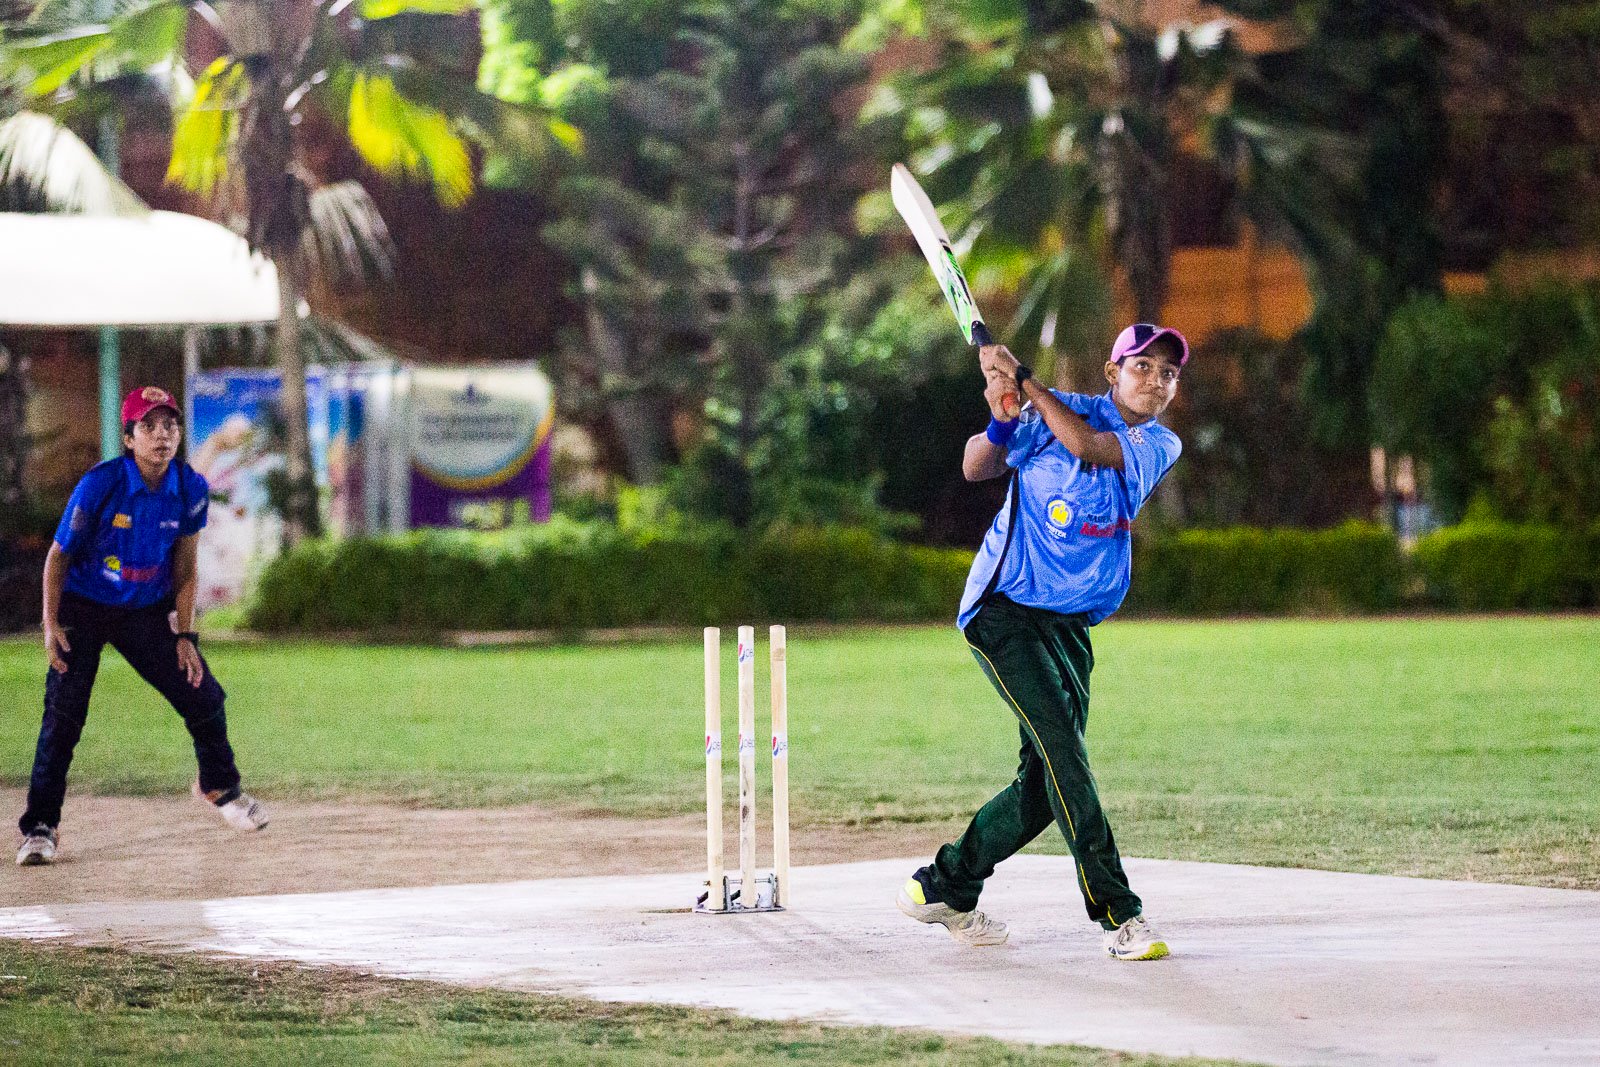 women s tournament shows passion for cricket runs in both genders